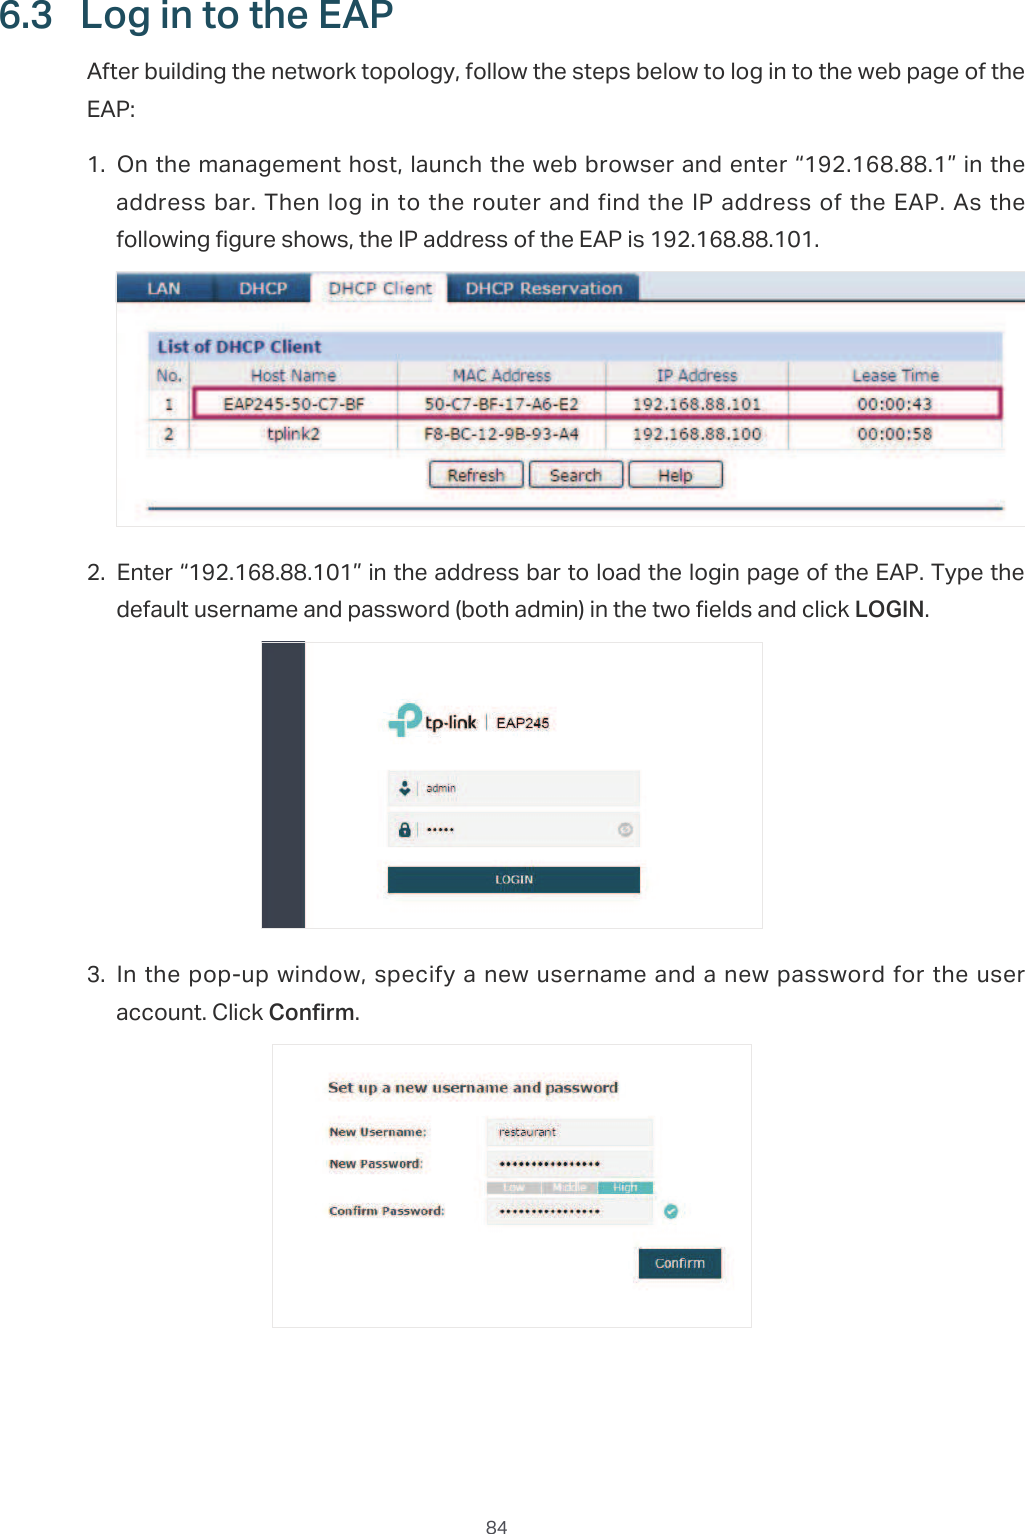  846.3  /RJLQWRWKH($3After building the network topology, follow the steps below to log in to the web page of the EAP:̝On the management host, launch the web browser and enter “192.168.88.1” in the address bar.  Then  log  in to the router and find  the IP address of the EAP. As the following figure shows, the IP address of the EAP is 192.168.88.101.̝Enter “192.168.88.101” in the address bar to load the login page of the EAP. Type the default username and password (both admin) in the two fields and click LOGIN.̝In the pop-up window, specify a  new username and a new password for the user account. Click Confirm.